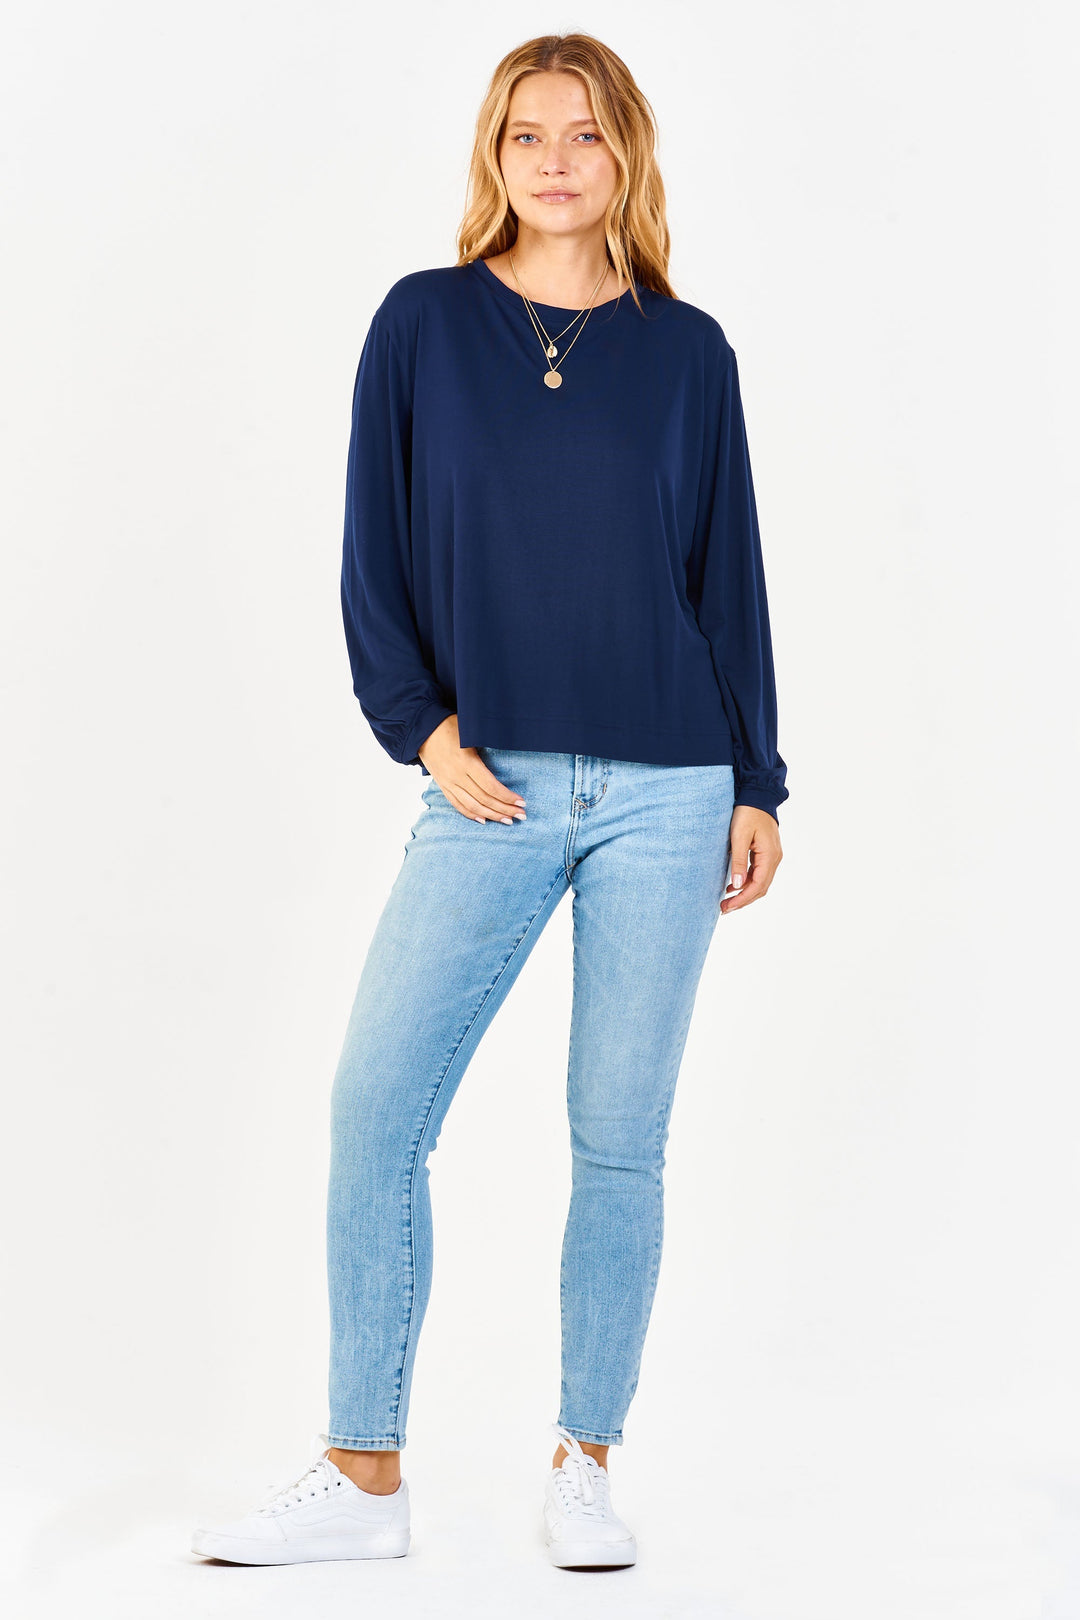 image of a female model wearing a MATILDA BASIC LONG SLEEVE TOP ECLIPSE TOPS